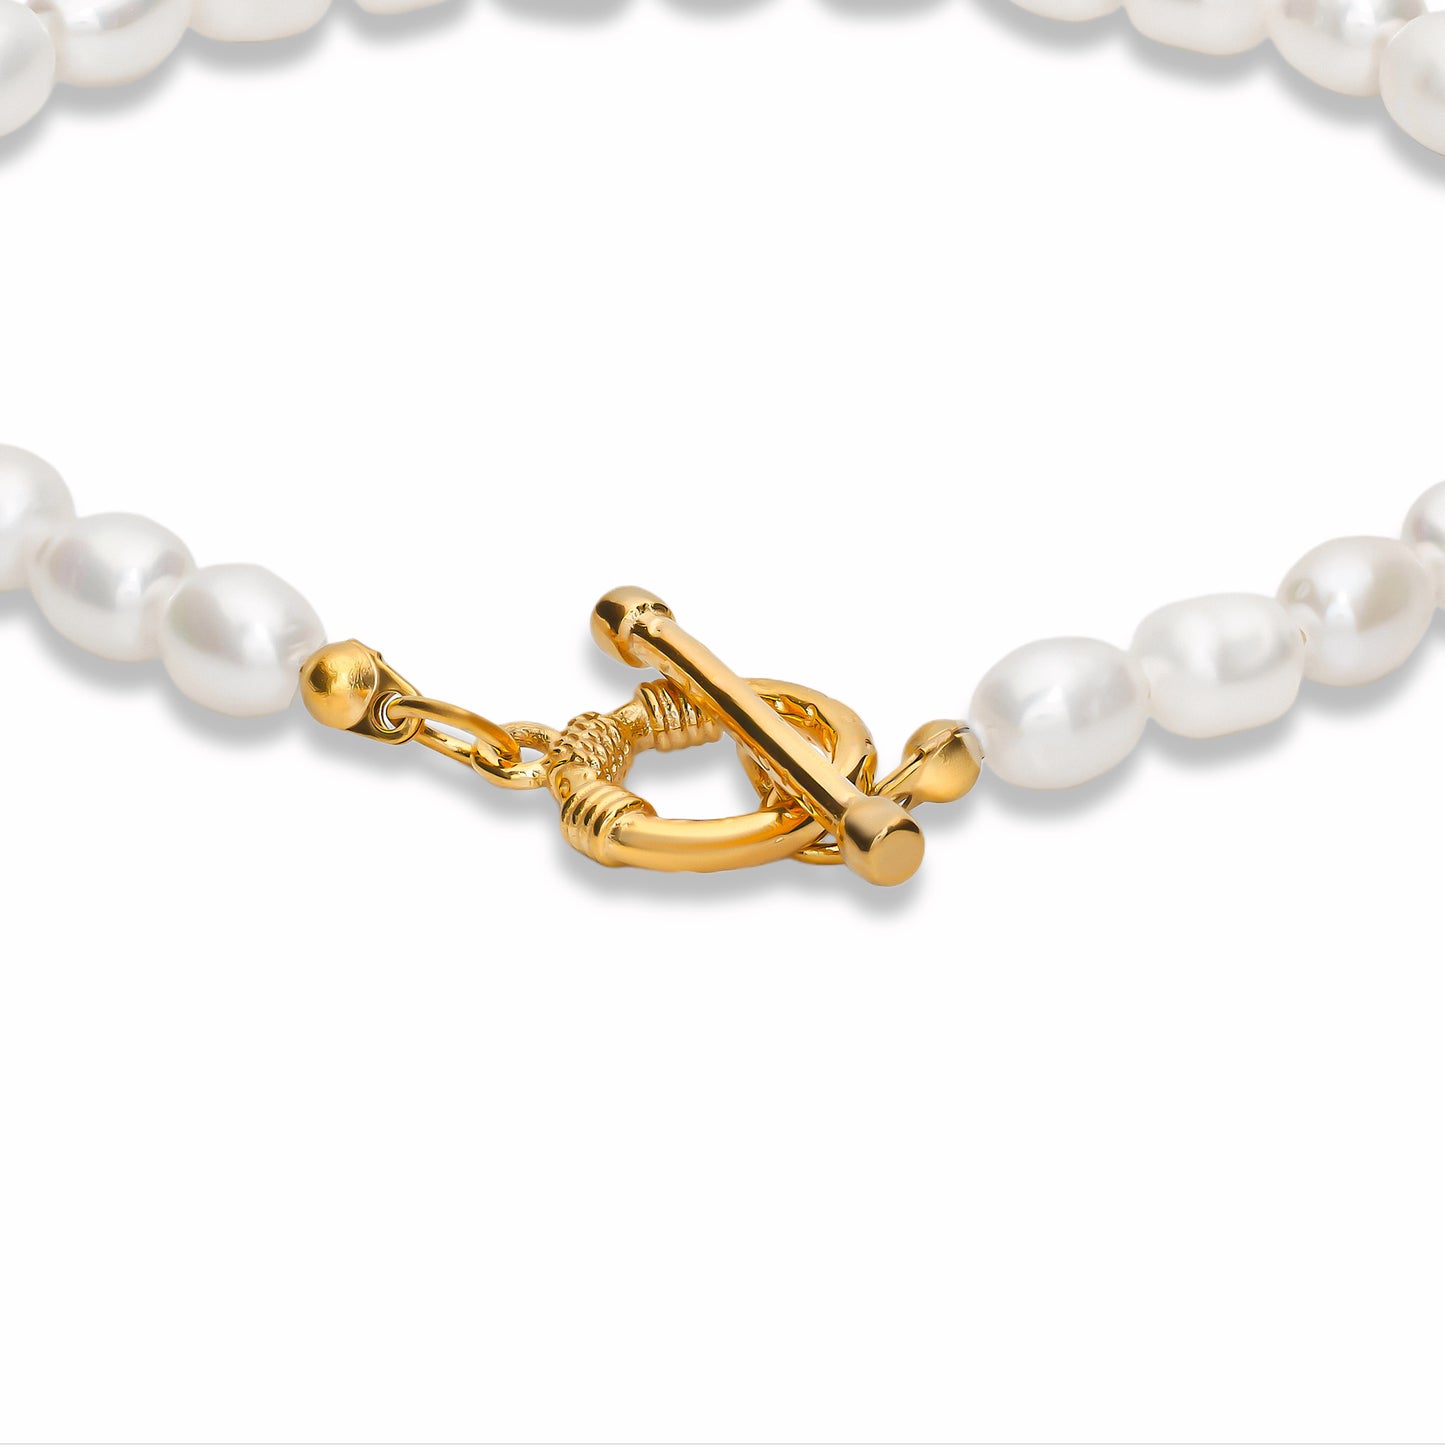 Toggle Clasp Pearl Bracelet on white background. Close up image of the toggle clasp